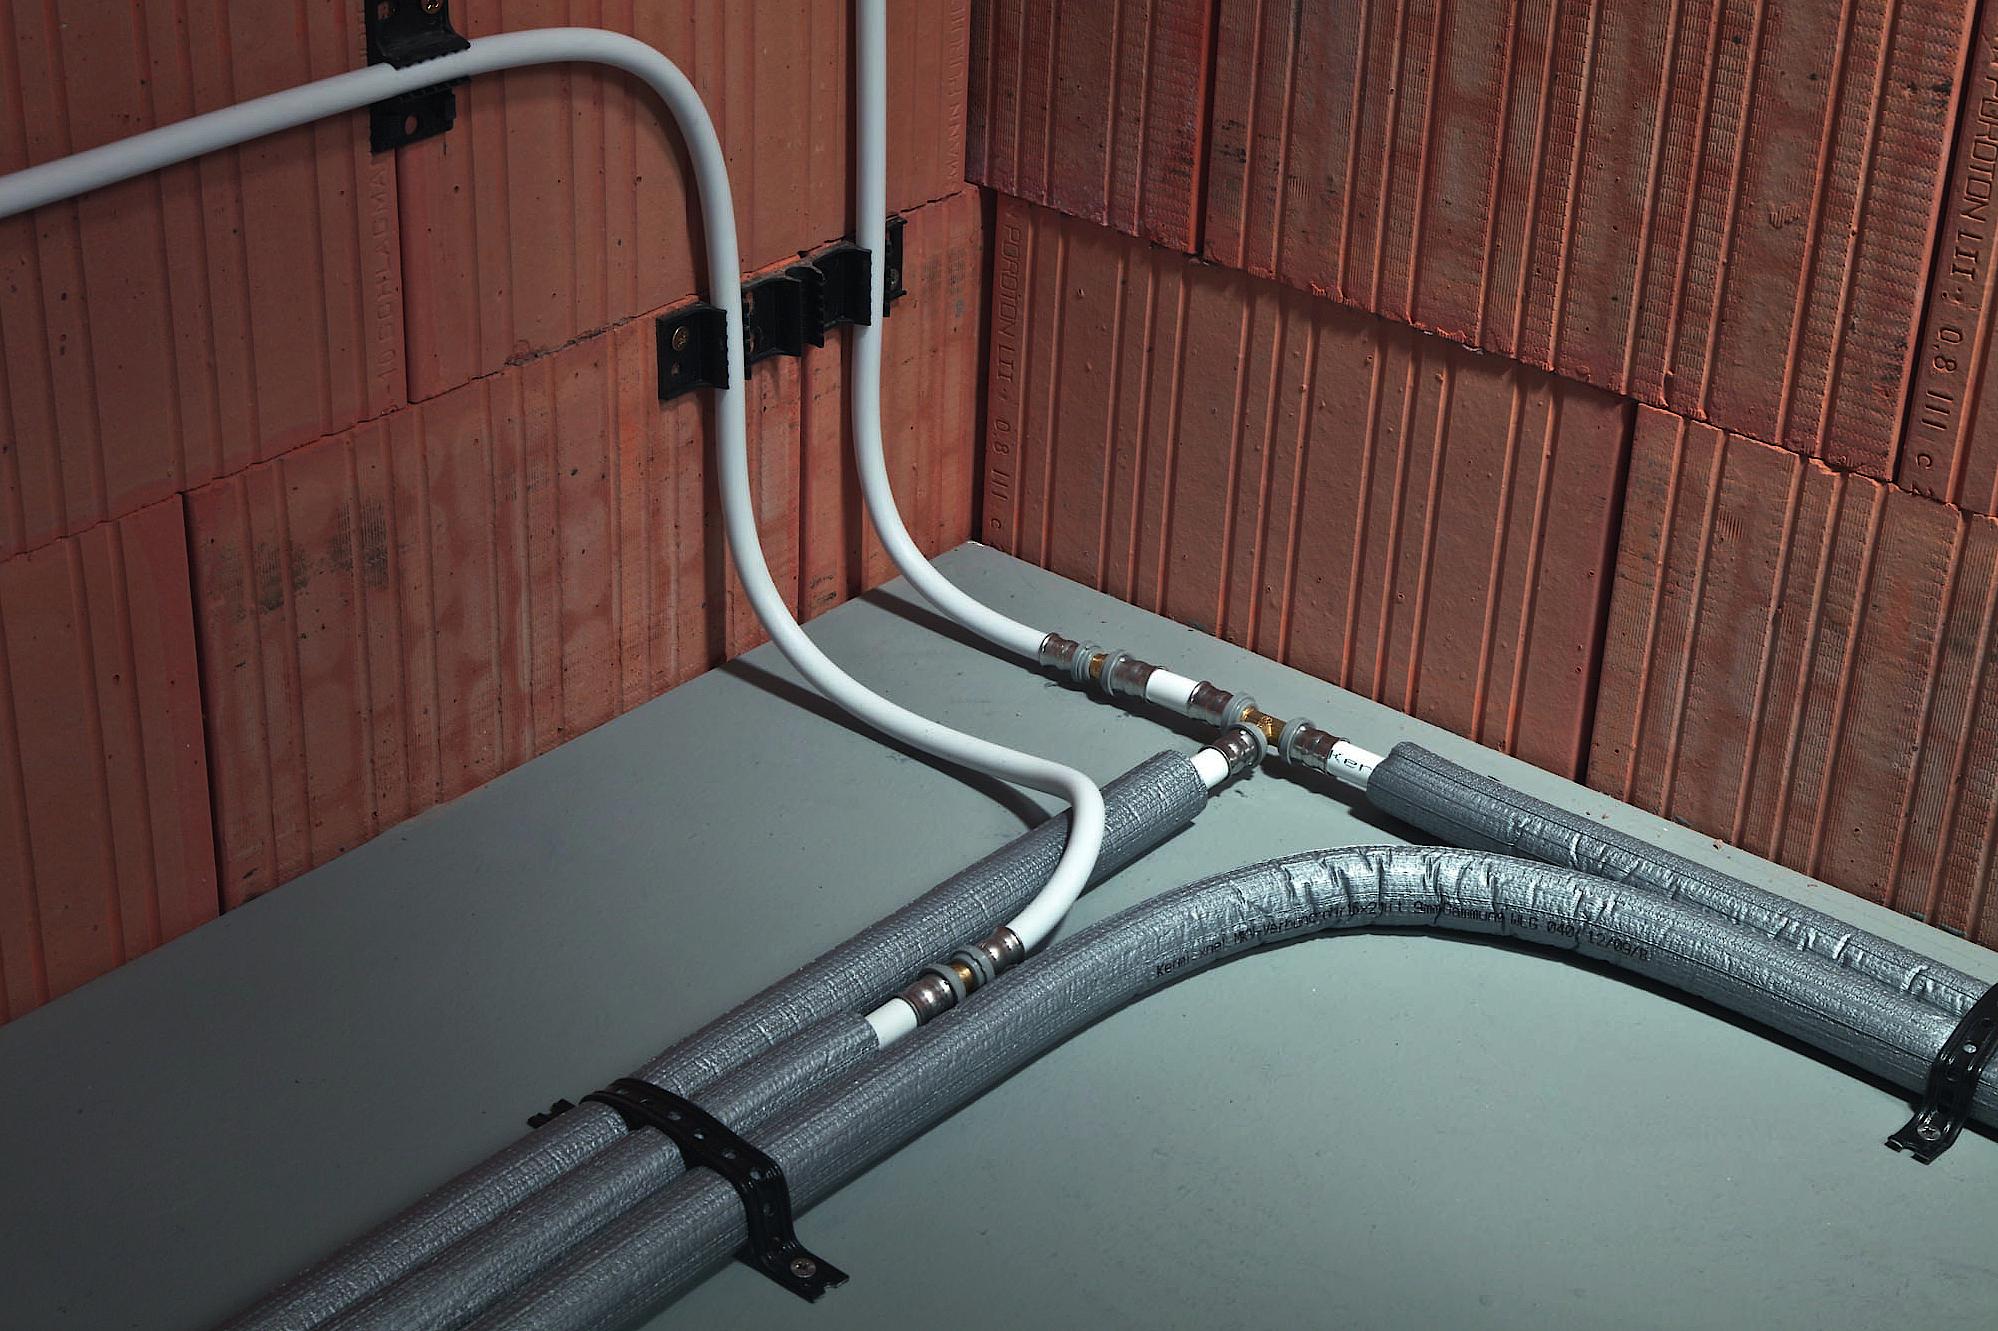 x-net C21 wall heating plaster system, wall heating connection.